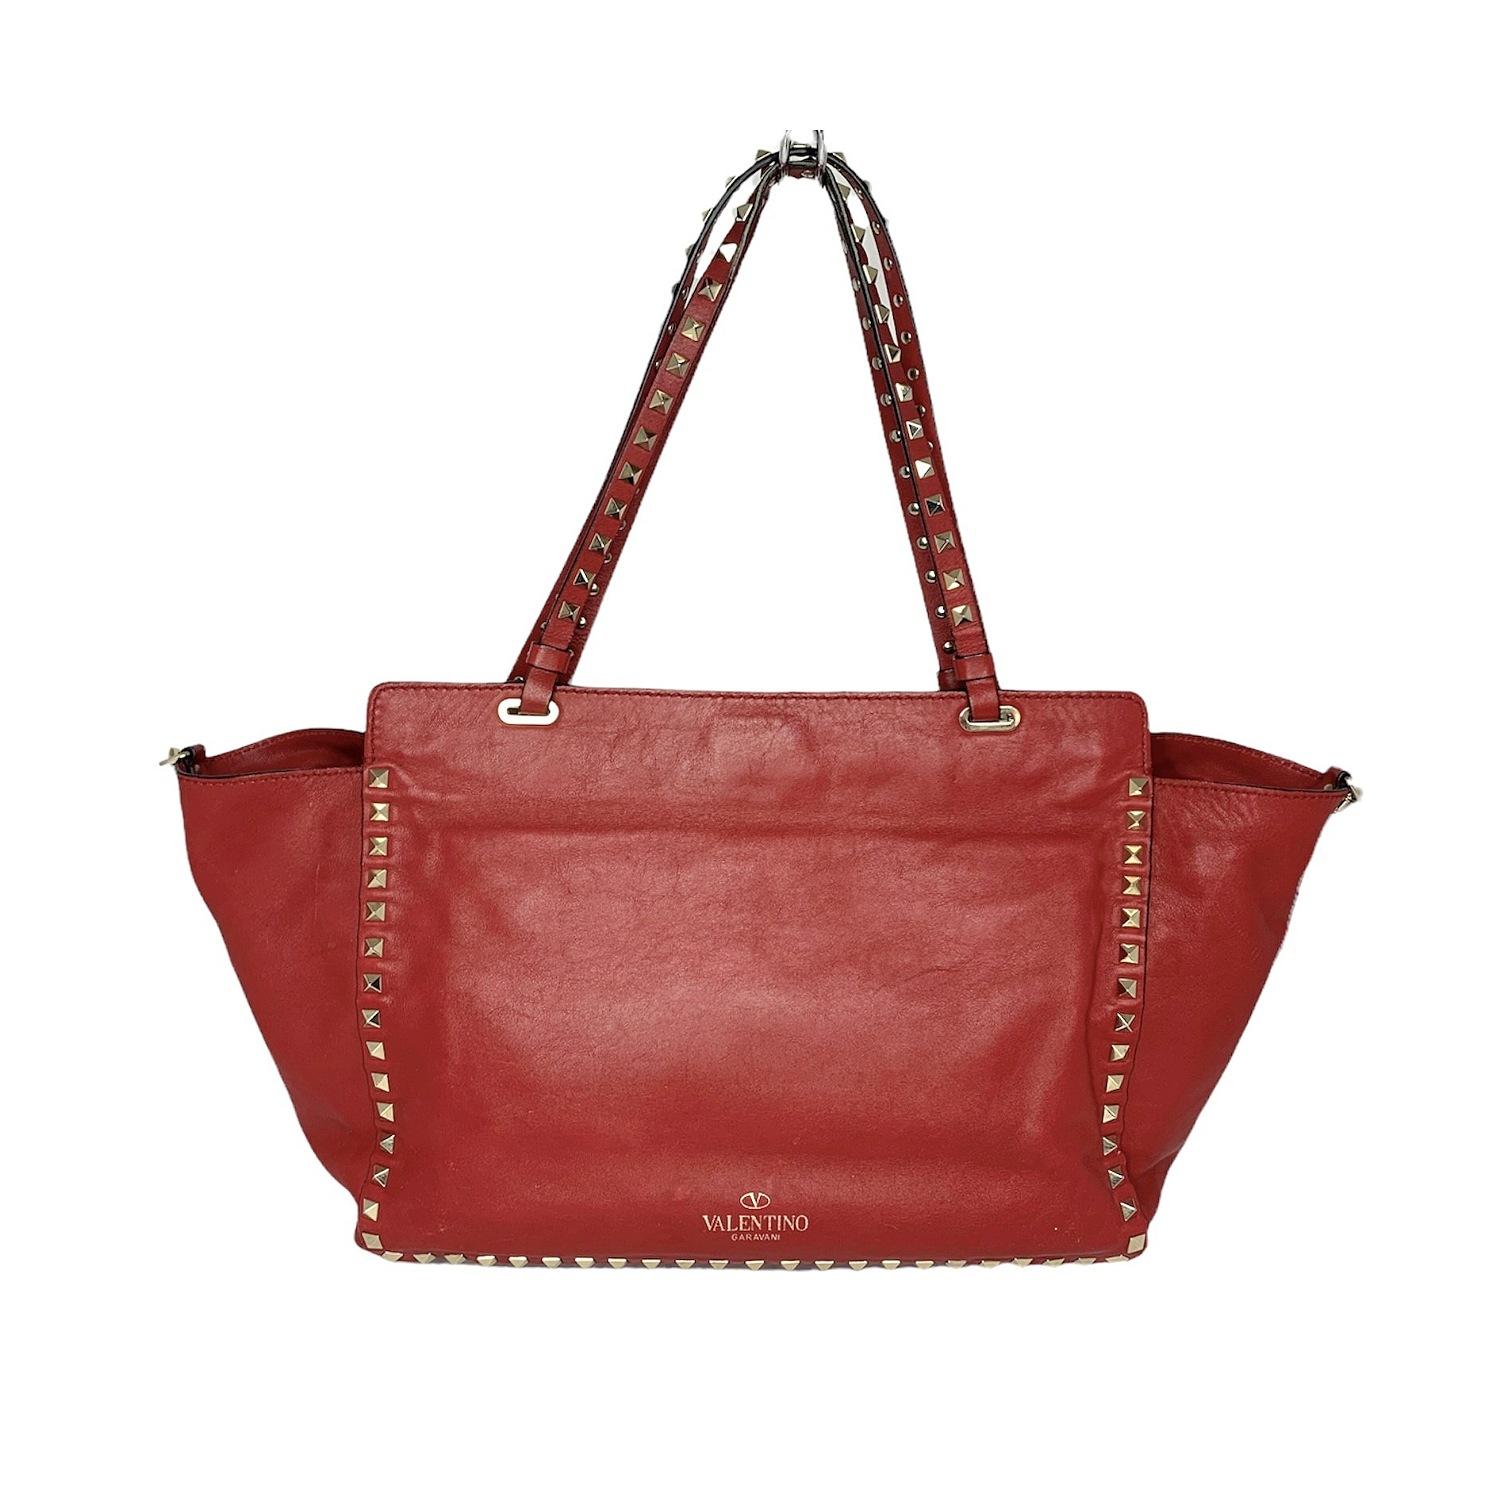 This chic and edgy handbag is crafted of rich calfskin in red. This shoulder bag features signature polished gold pyramid studs along the borders of the bag, the handles, and optional shoulder strap. The top is secured with a fold-over clasp and